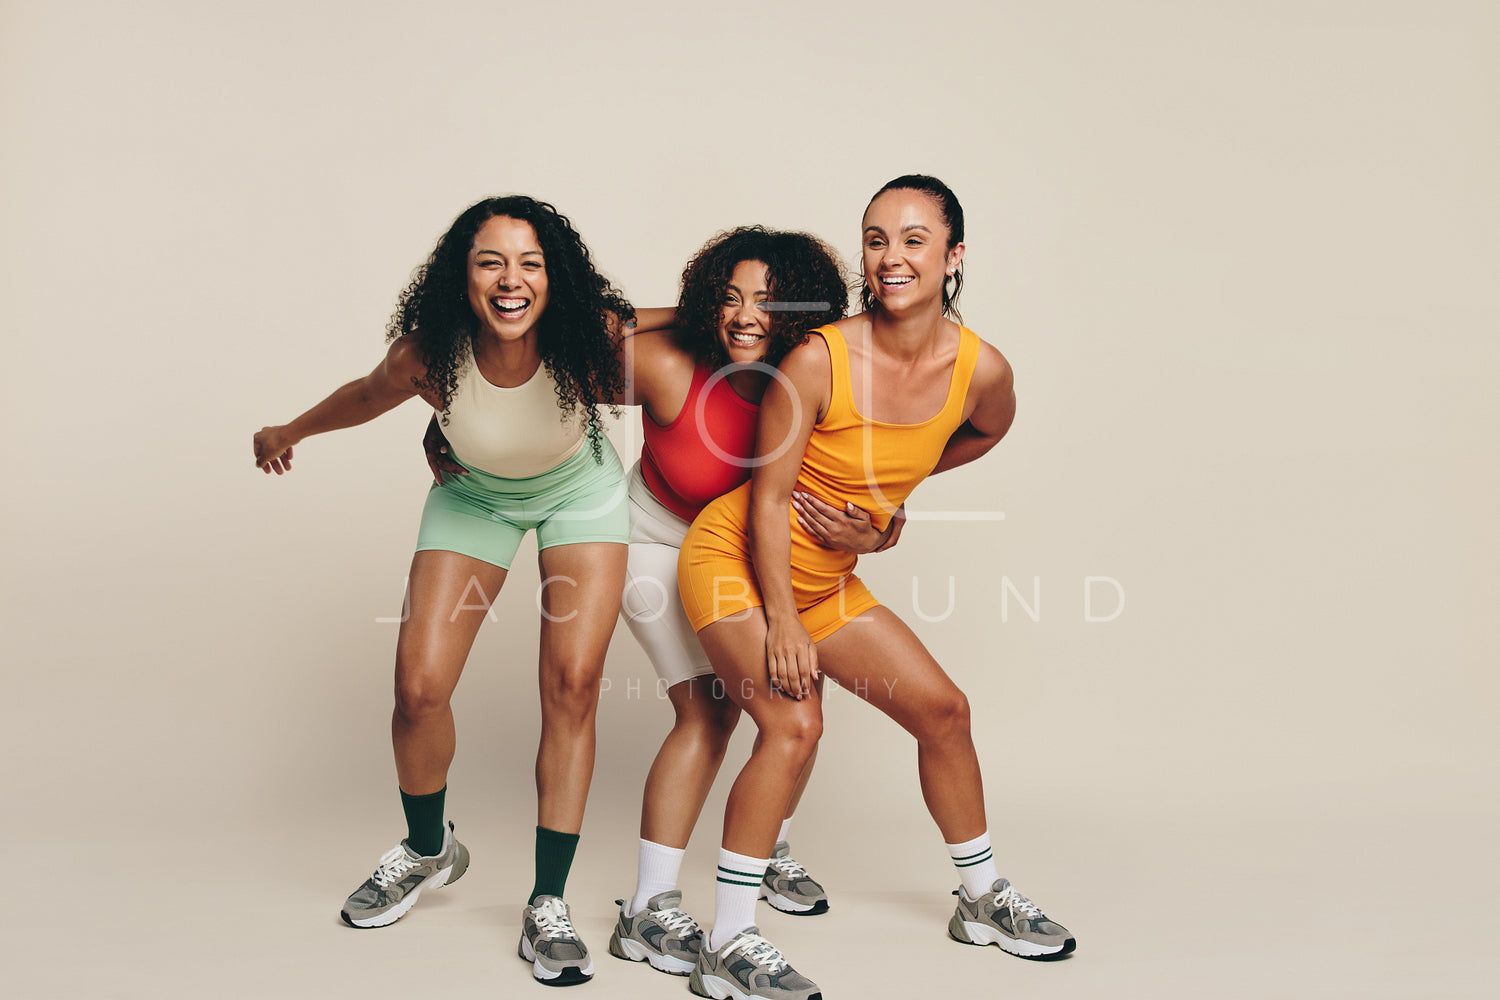 Fitness fun: Group of happy female athletes laughing in sportswear – Jacob  Lund Photography Store- premium stock photo